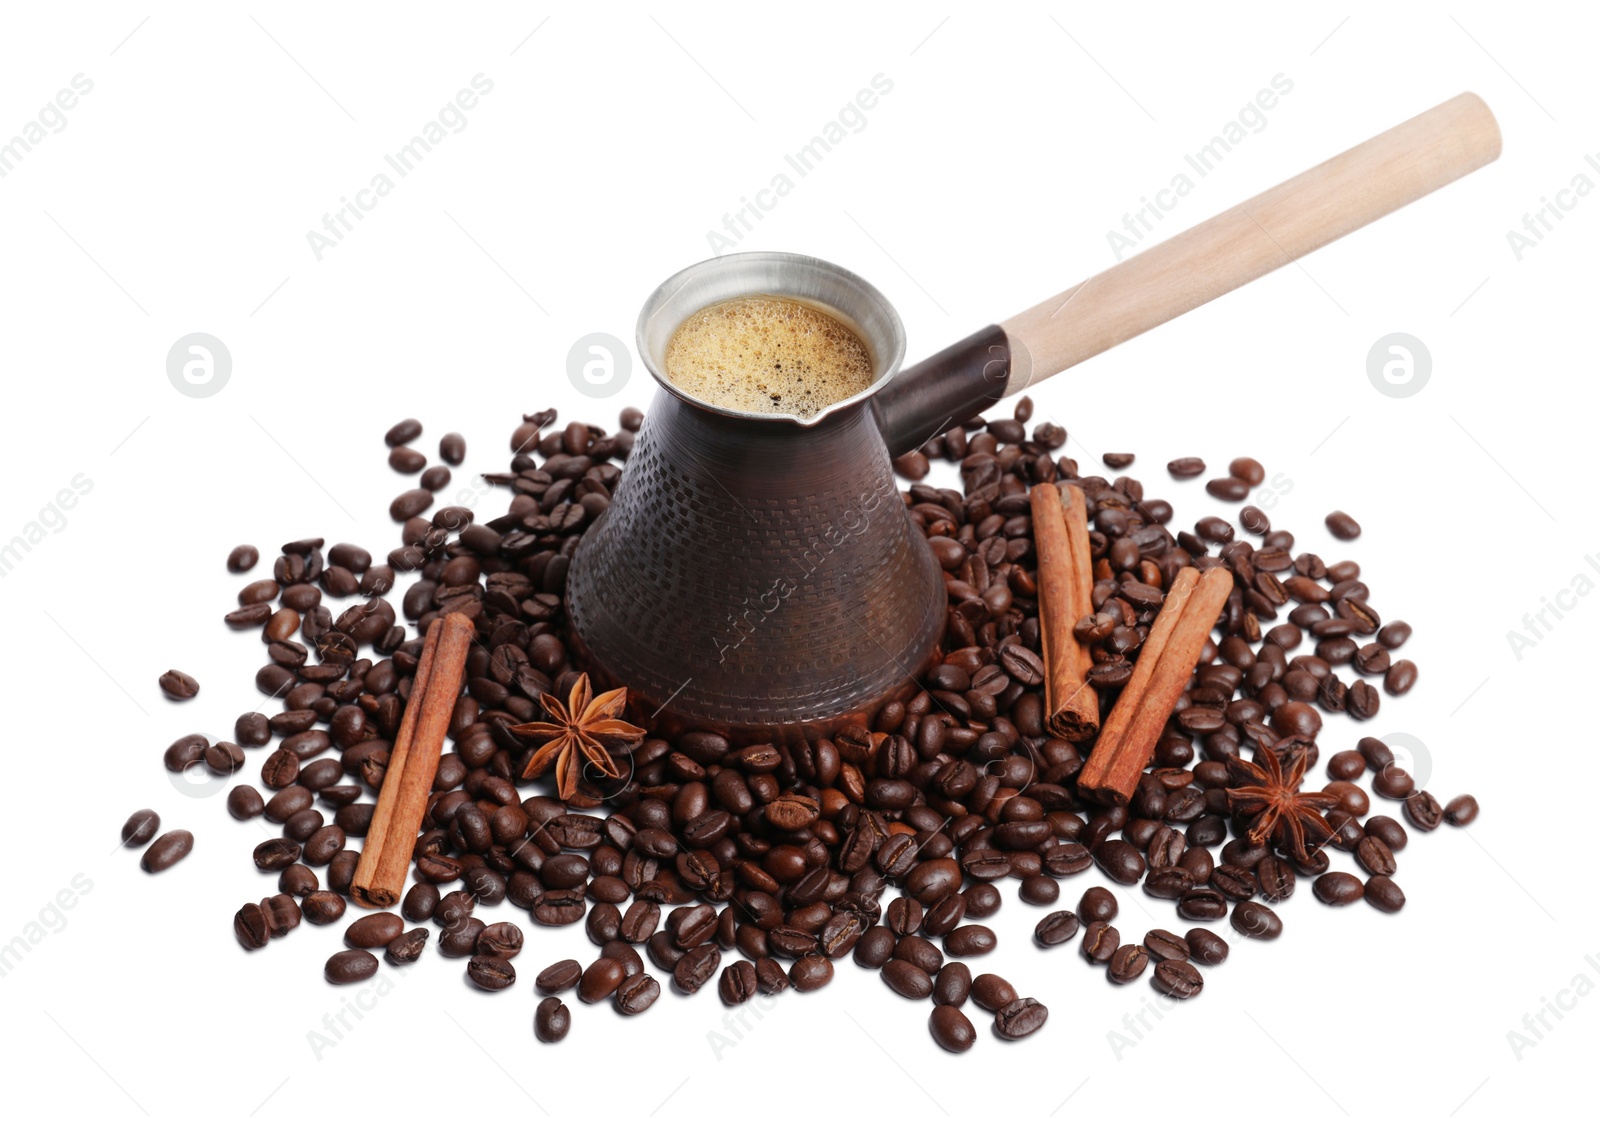 Photo of Metal turkish coffee pot with hot drink, beans and spices on white background